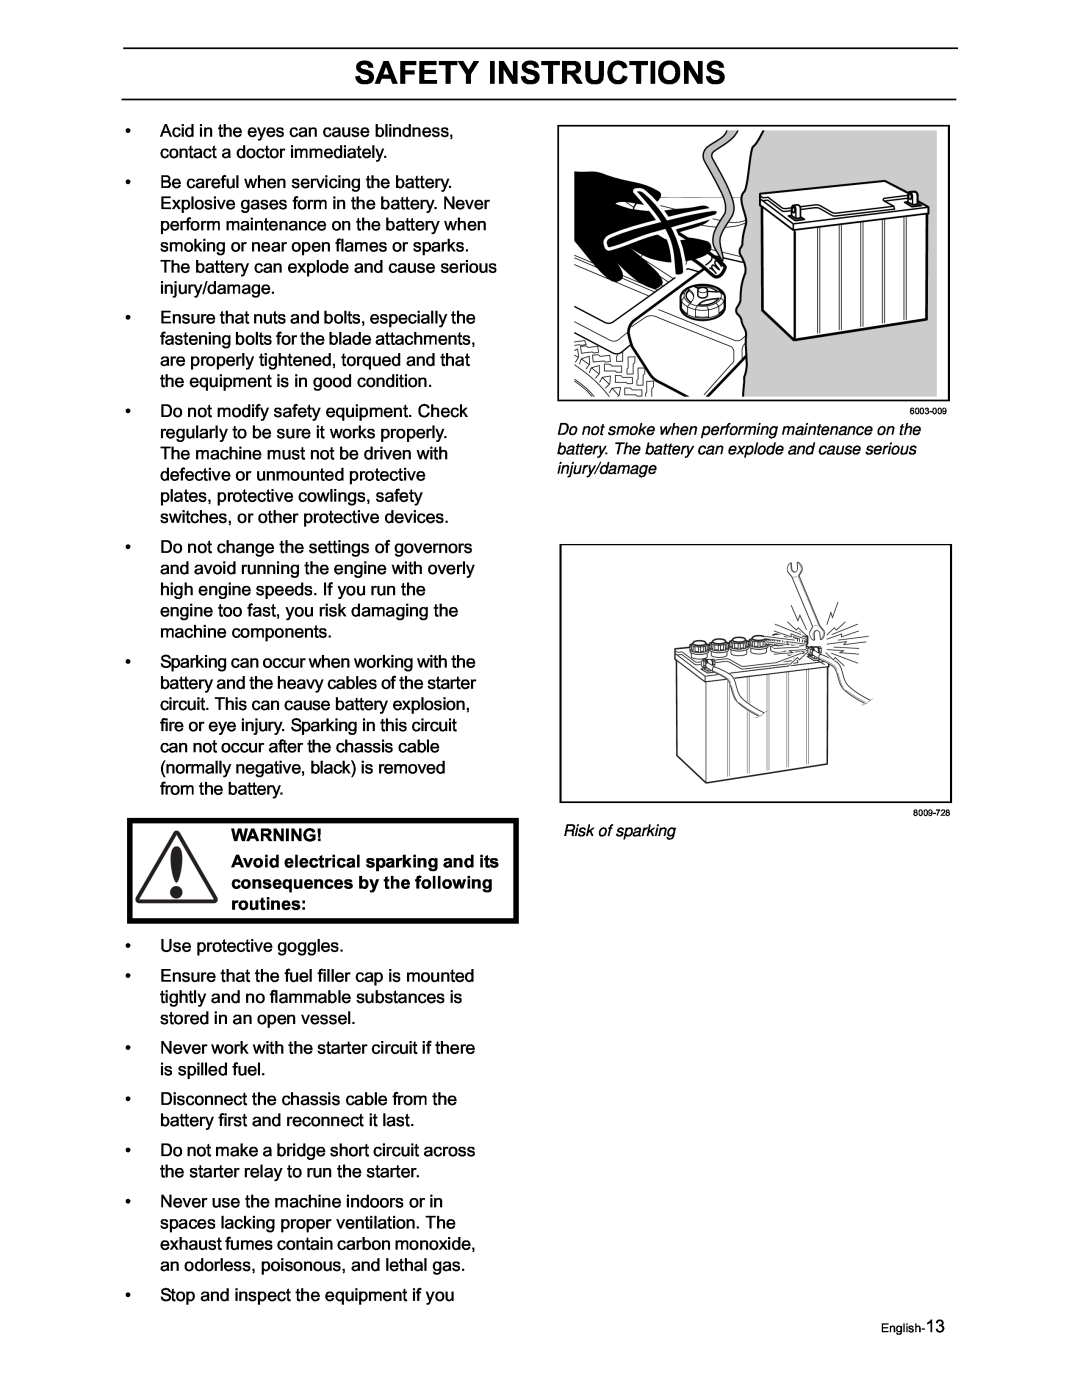 Yazoo/Kees ZVKH61273, ZVKW52253, ZVKH61303, ZVKH72303 manual Safety Instructions, Use protective goggles 